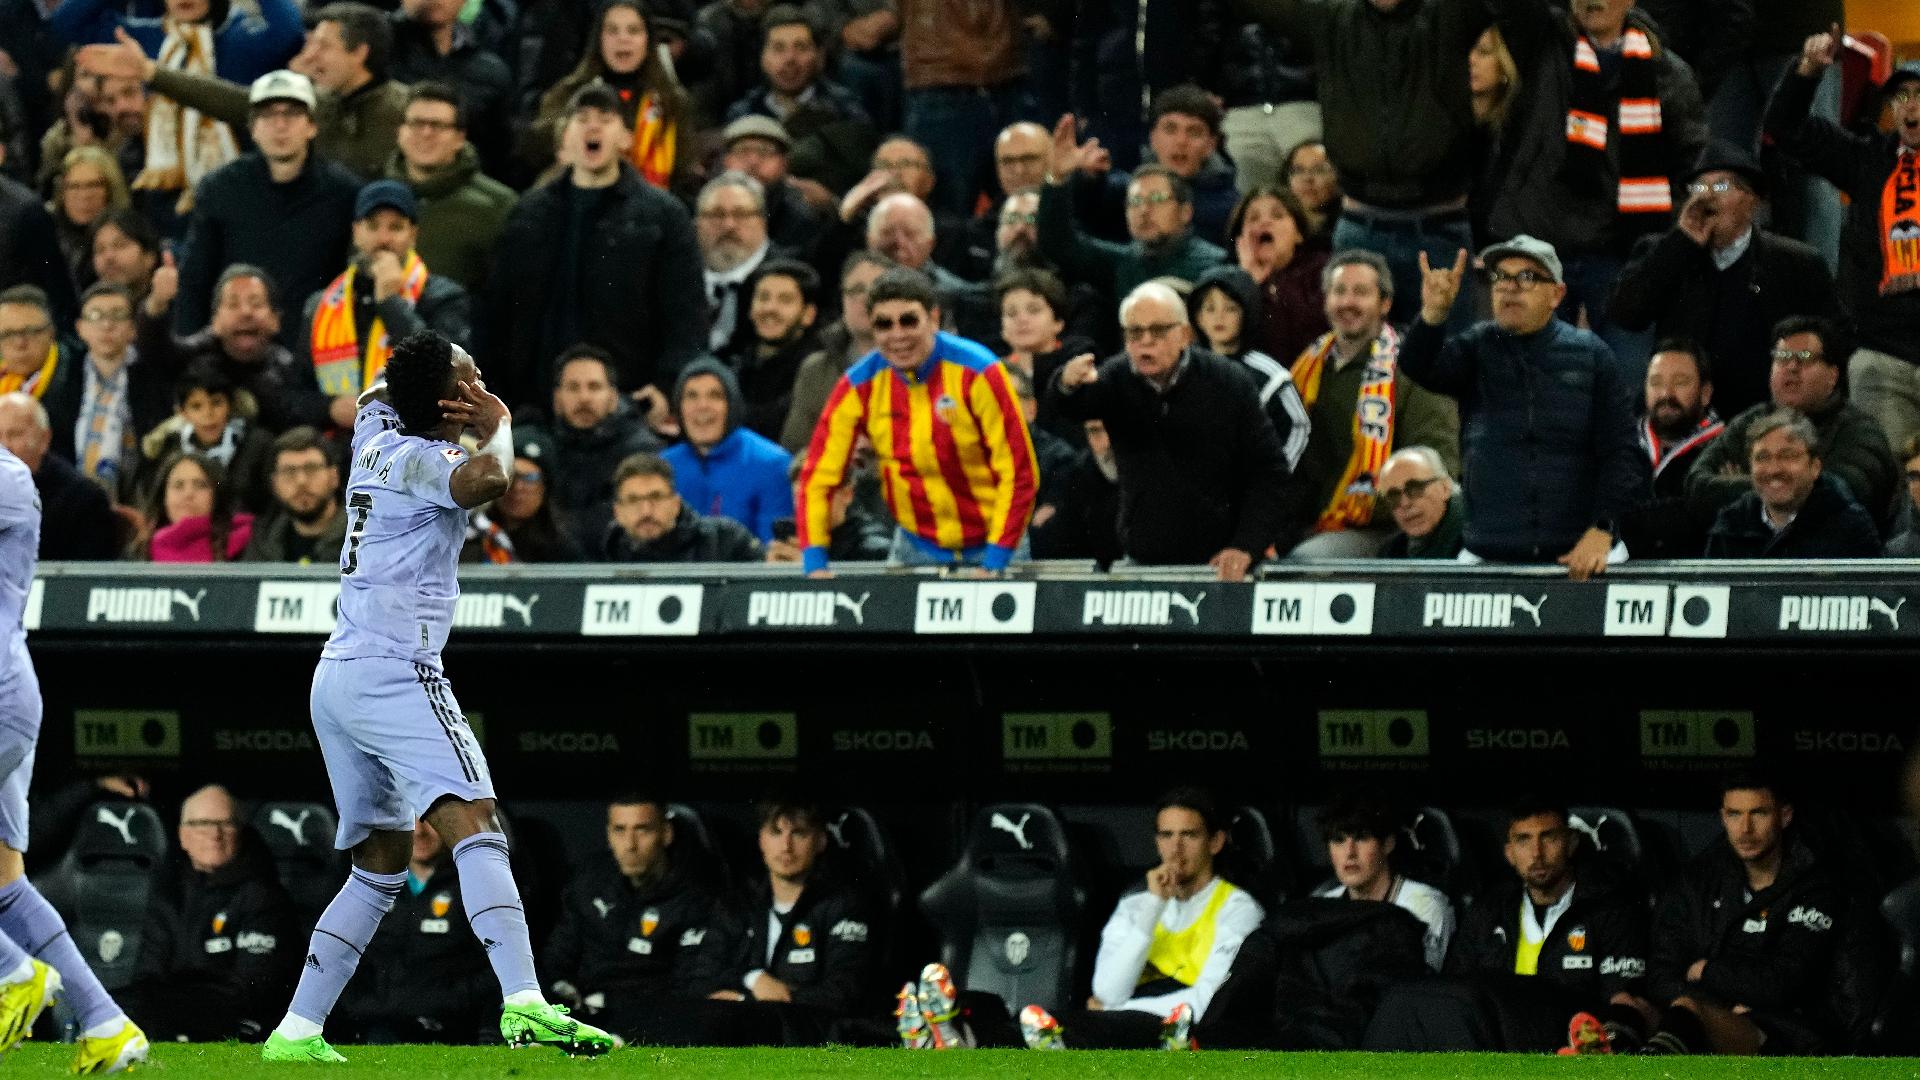 Leaders Real Madrid fight back to share points with Valencia